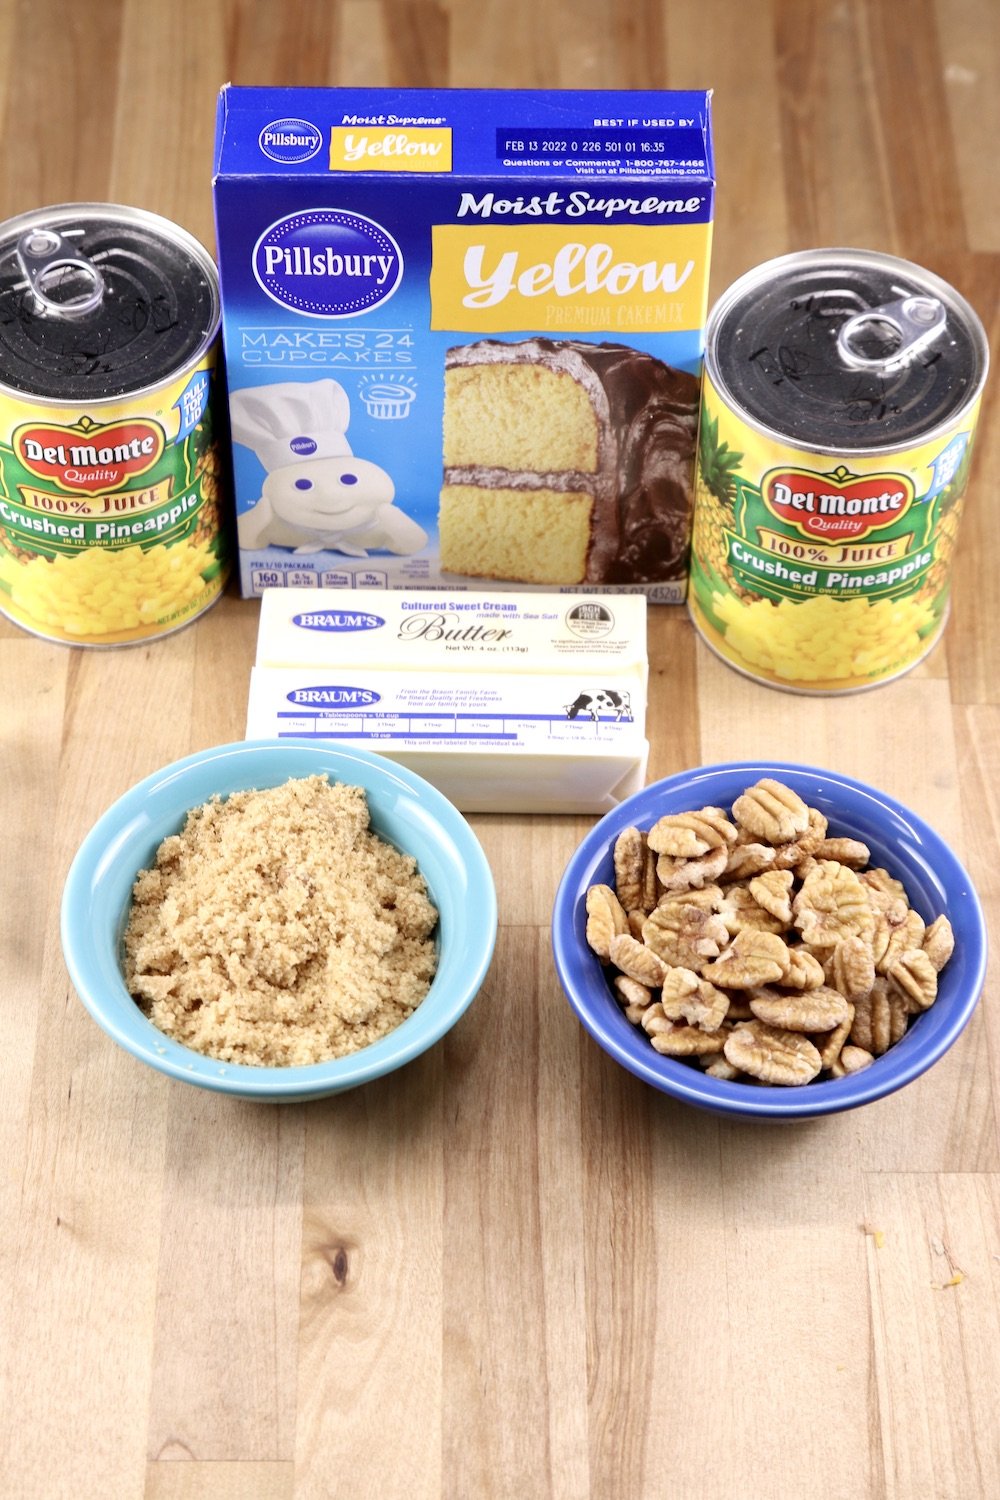 Dump Cake Ingredients: 2 cans crushed pineapple, yellow cake mix, brown sugar, butter, pecans